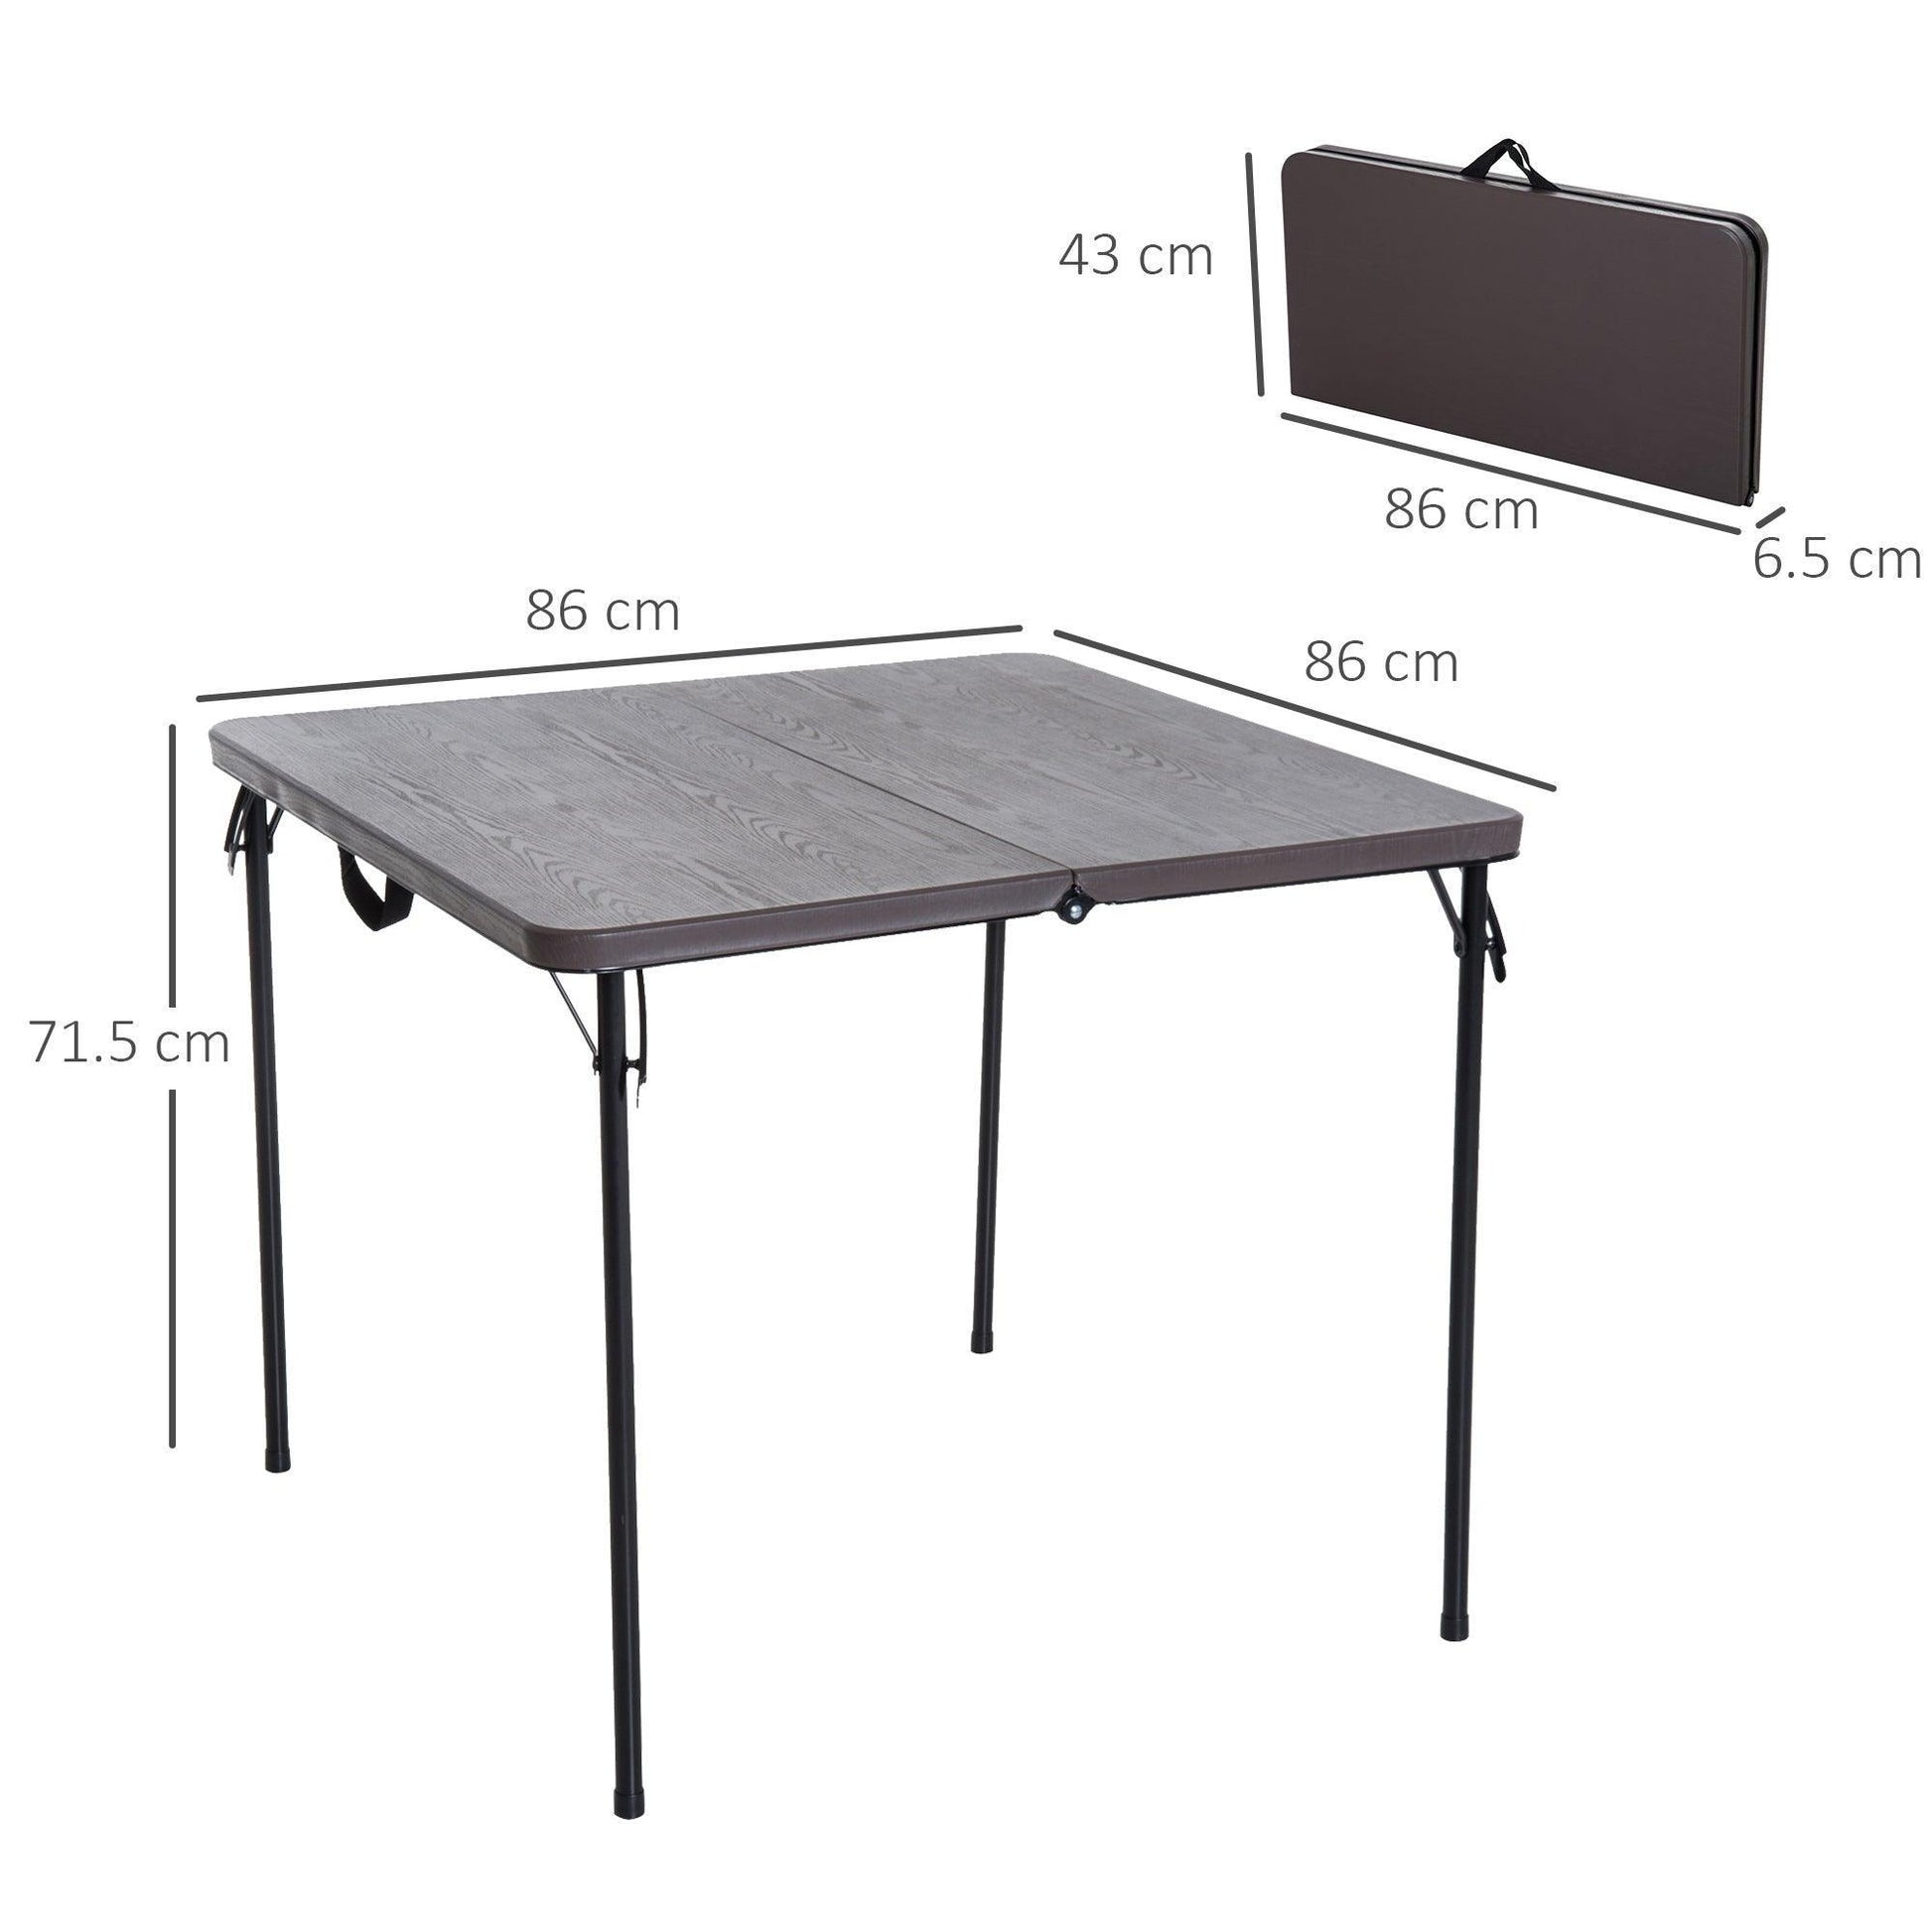 Outsunny Portable Picnic Table for Outdoor Events - ALL4U RETAILER LTD